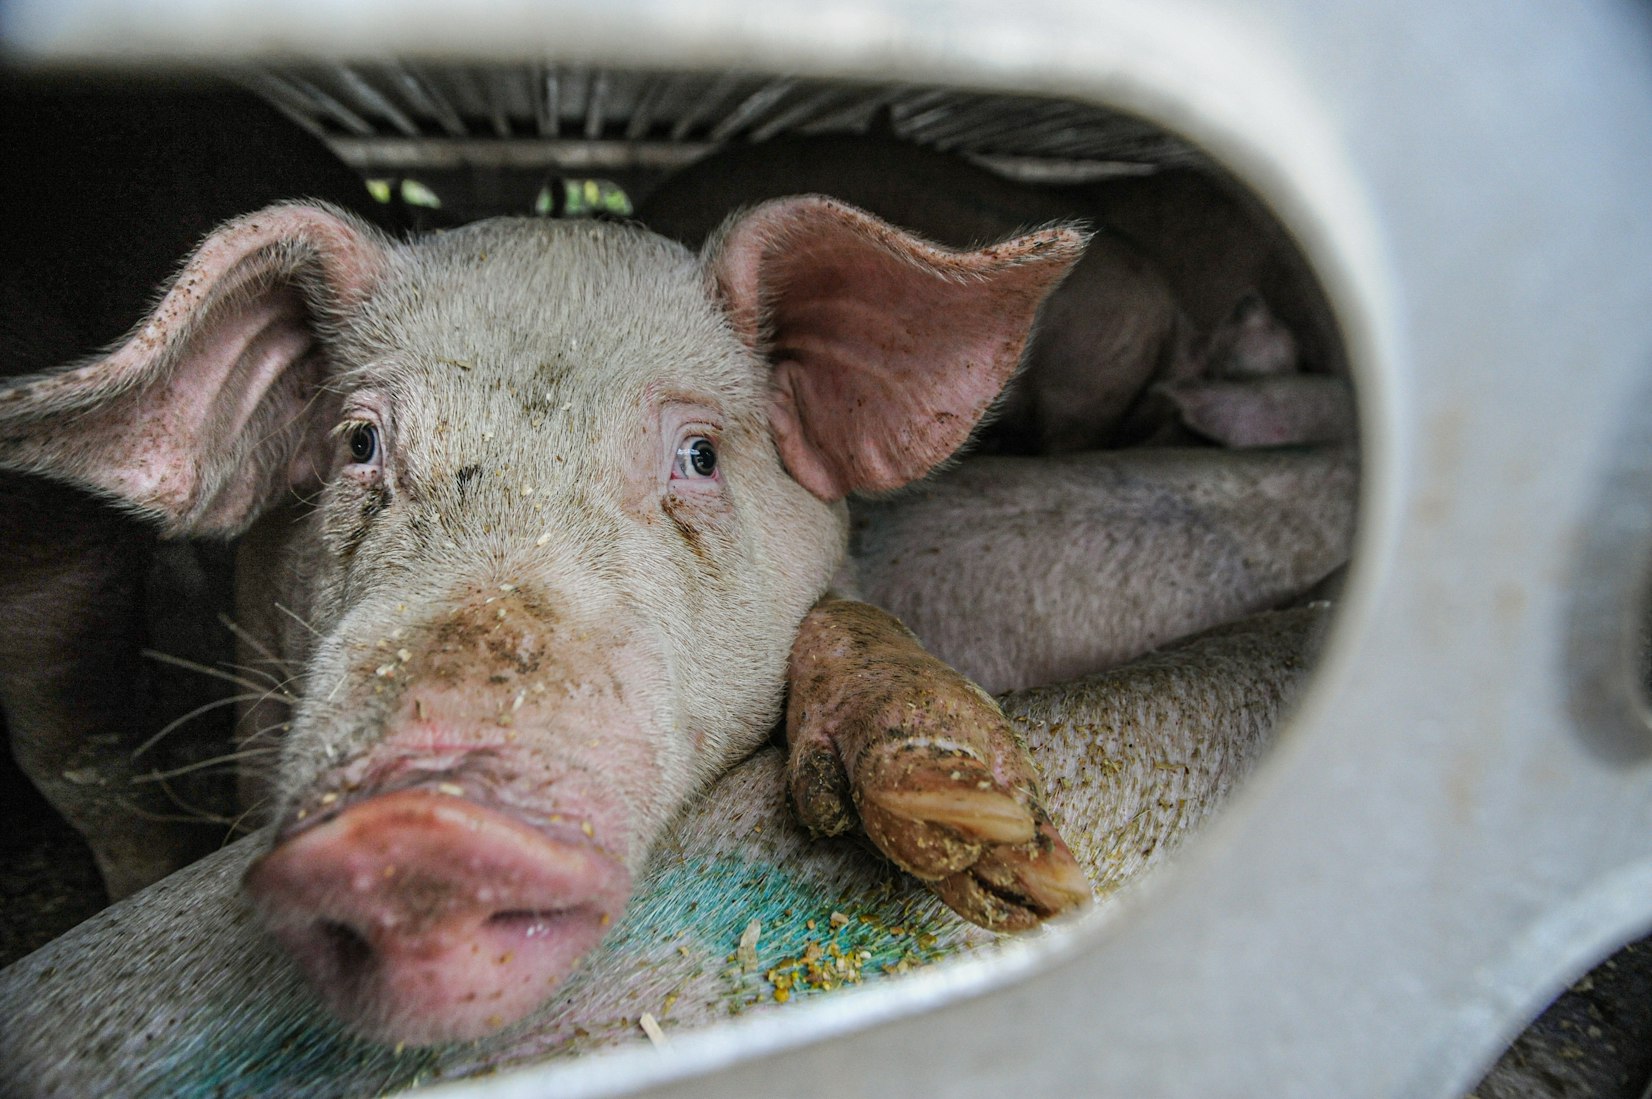 Virus Plagues the Pork Industry, and Environmentalists